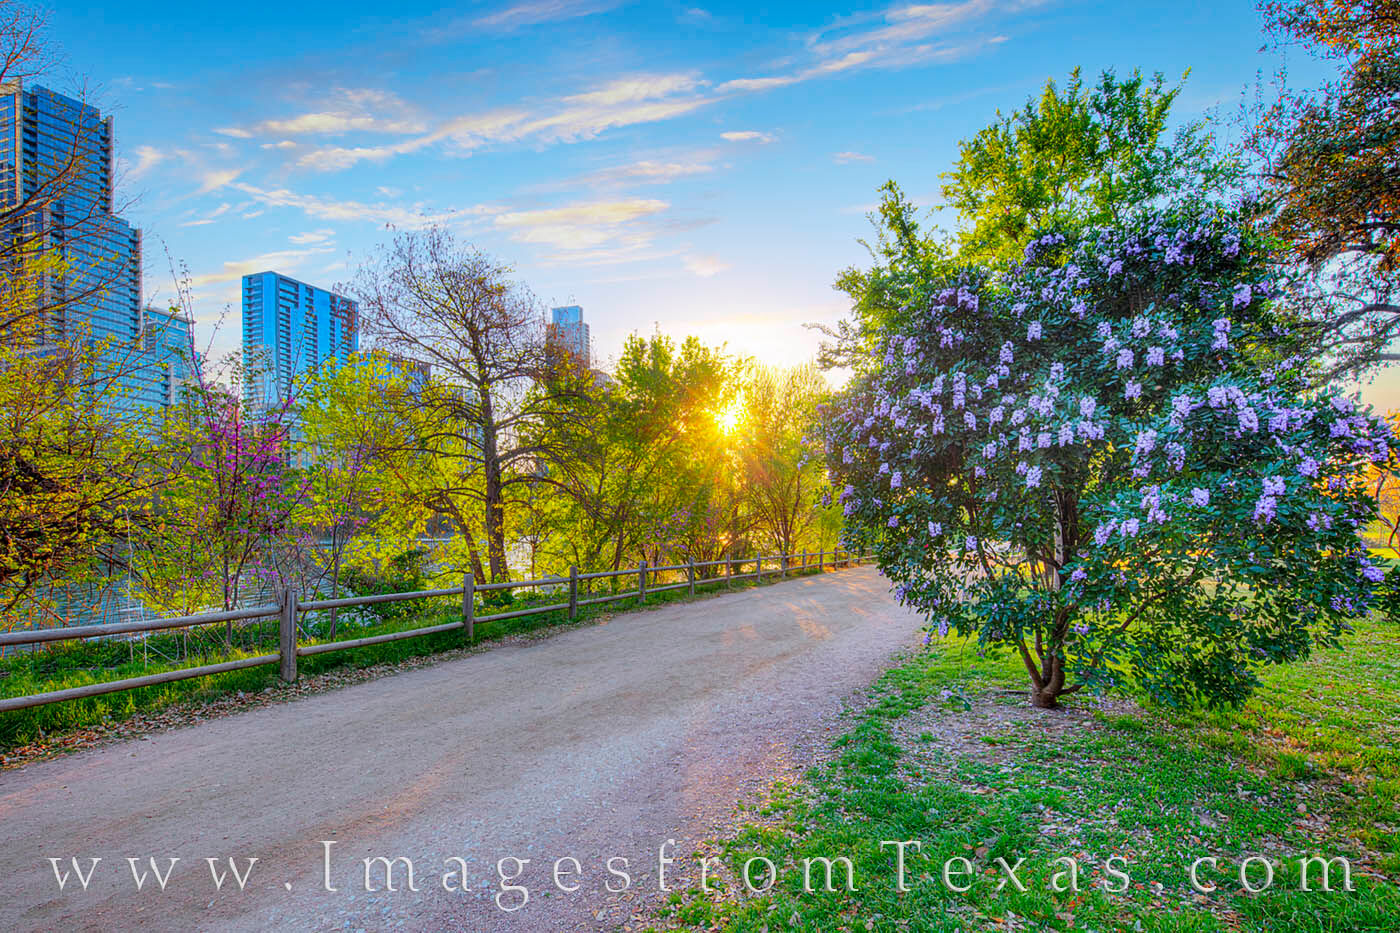 The Zilker Park Hike and Bike Trail that runs along Lady Bird Lake in downtown Austin has some amazing views. This is sunrise...